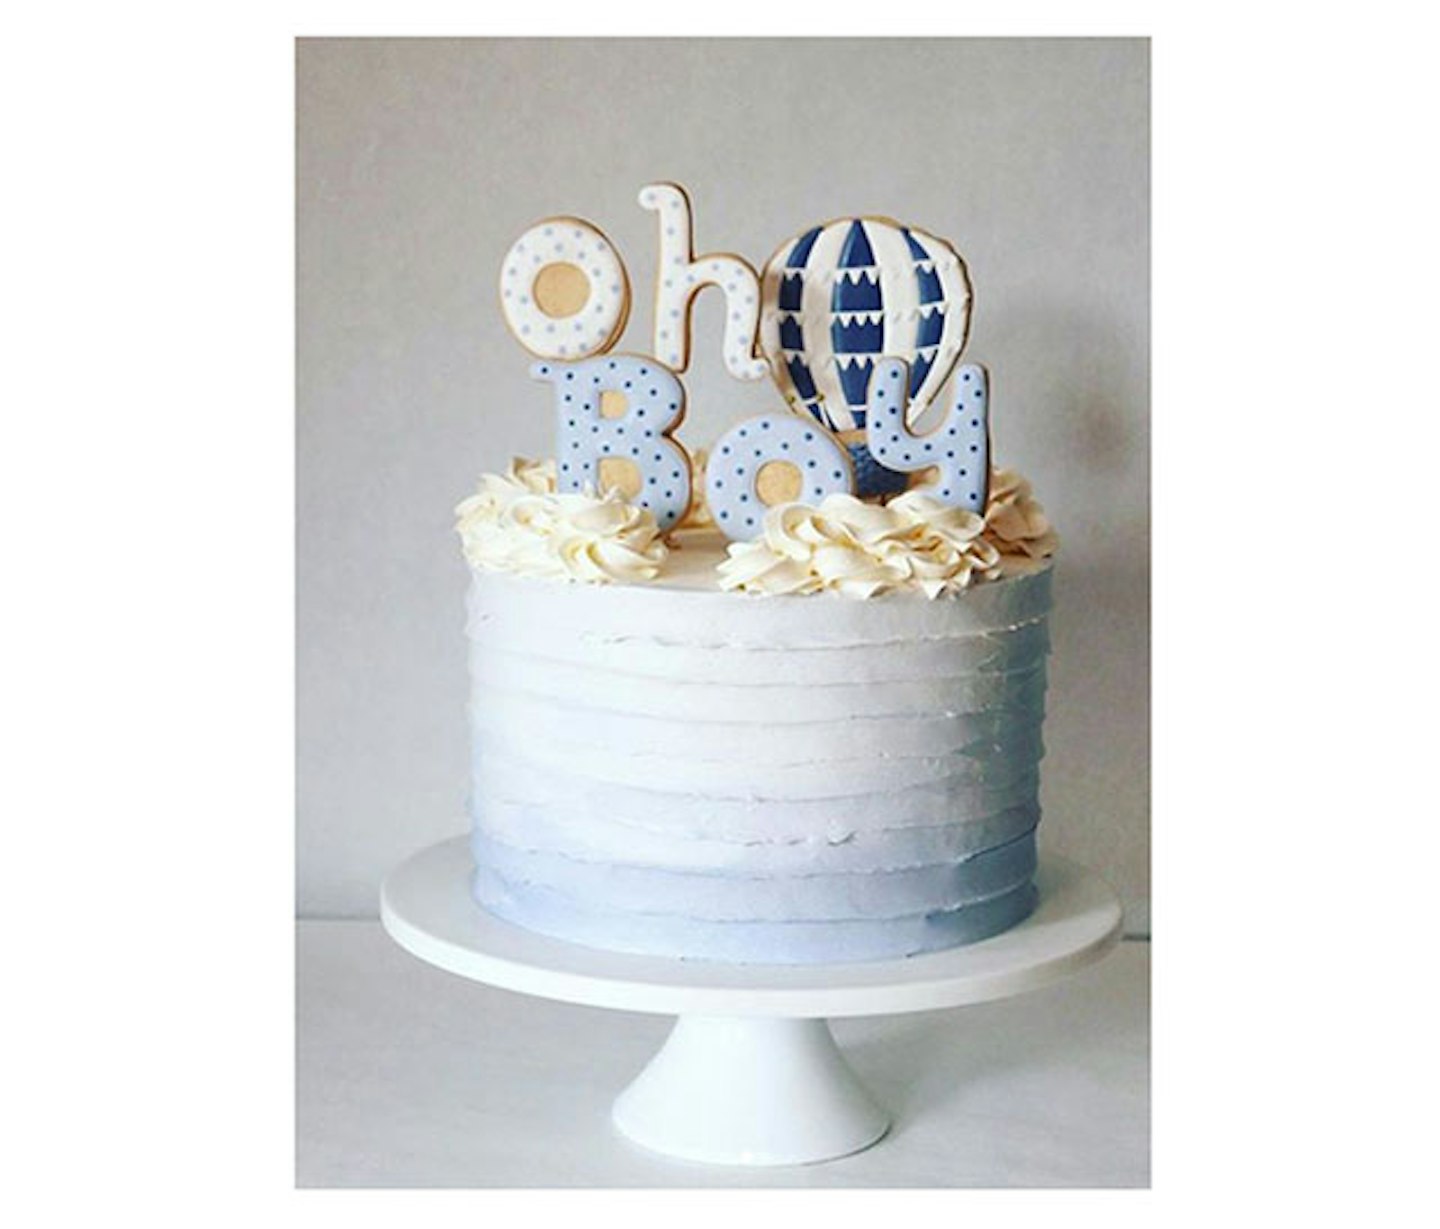 50 baby shower cake ideas for boys and girls | Pregnancy | Mother ...